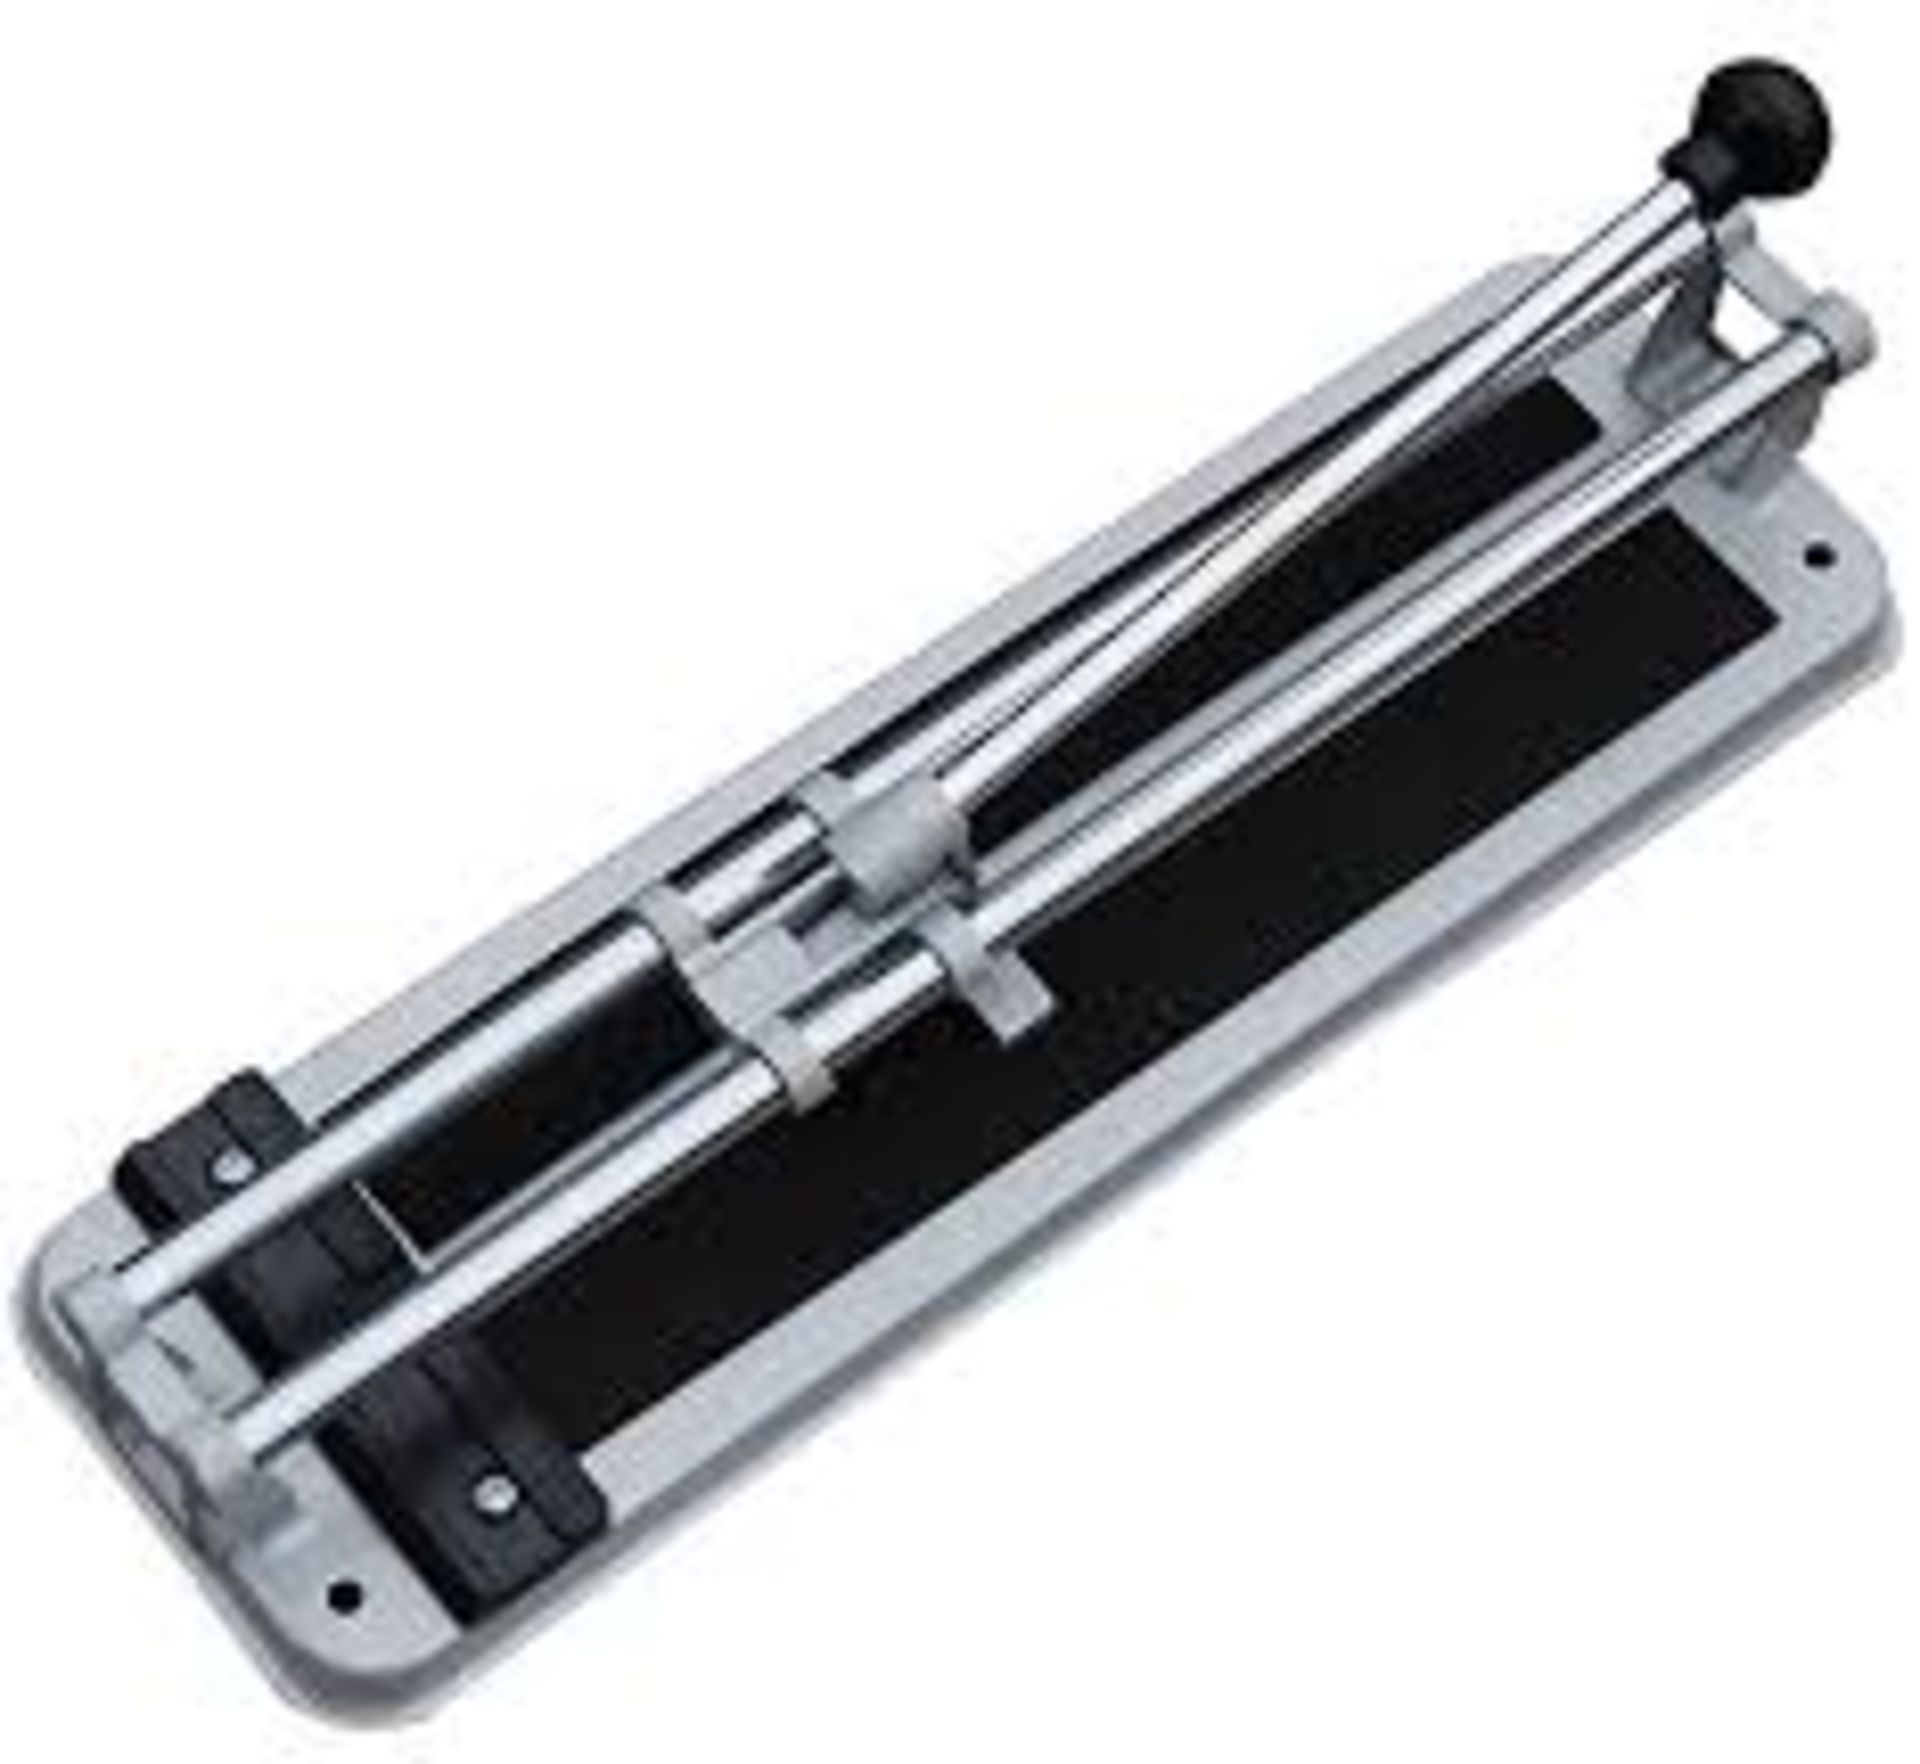 330mm Manual Tile cutter. - PW. This Light duty 330mm tungsten carbide tile cutter with it's 15mm